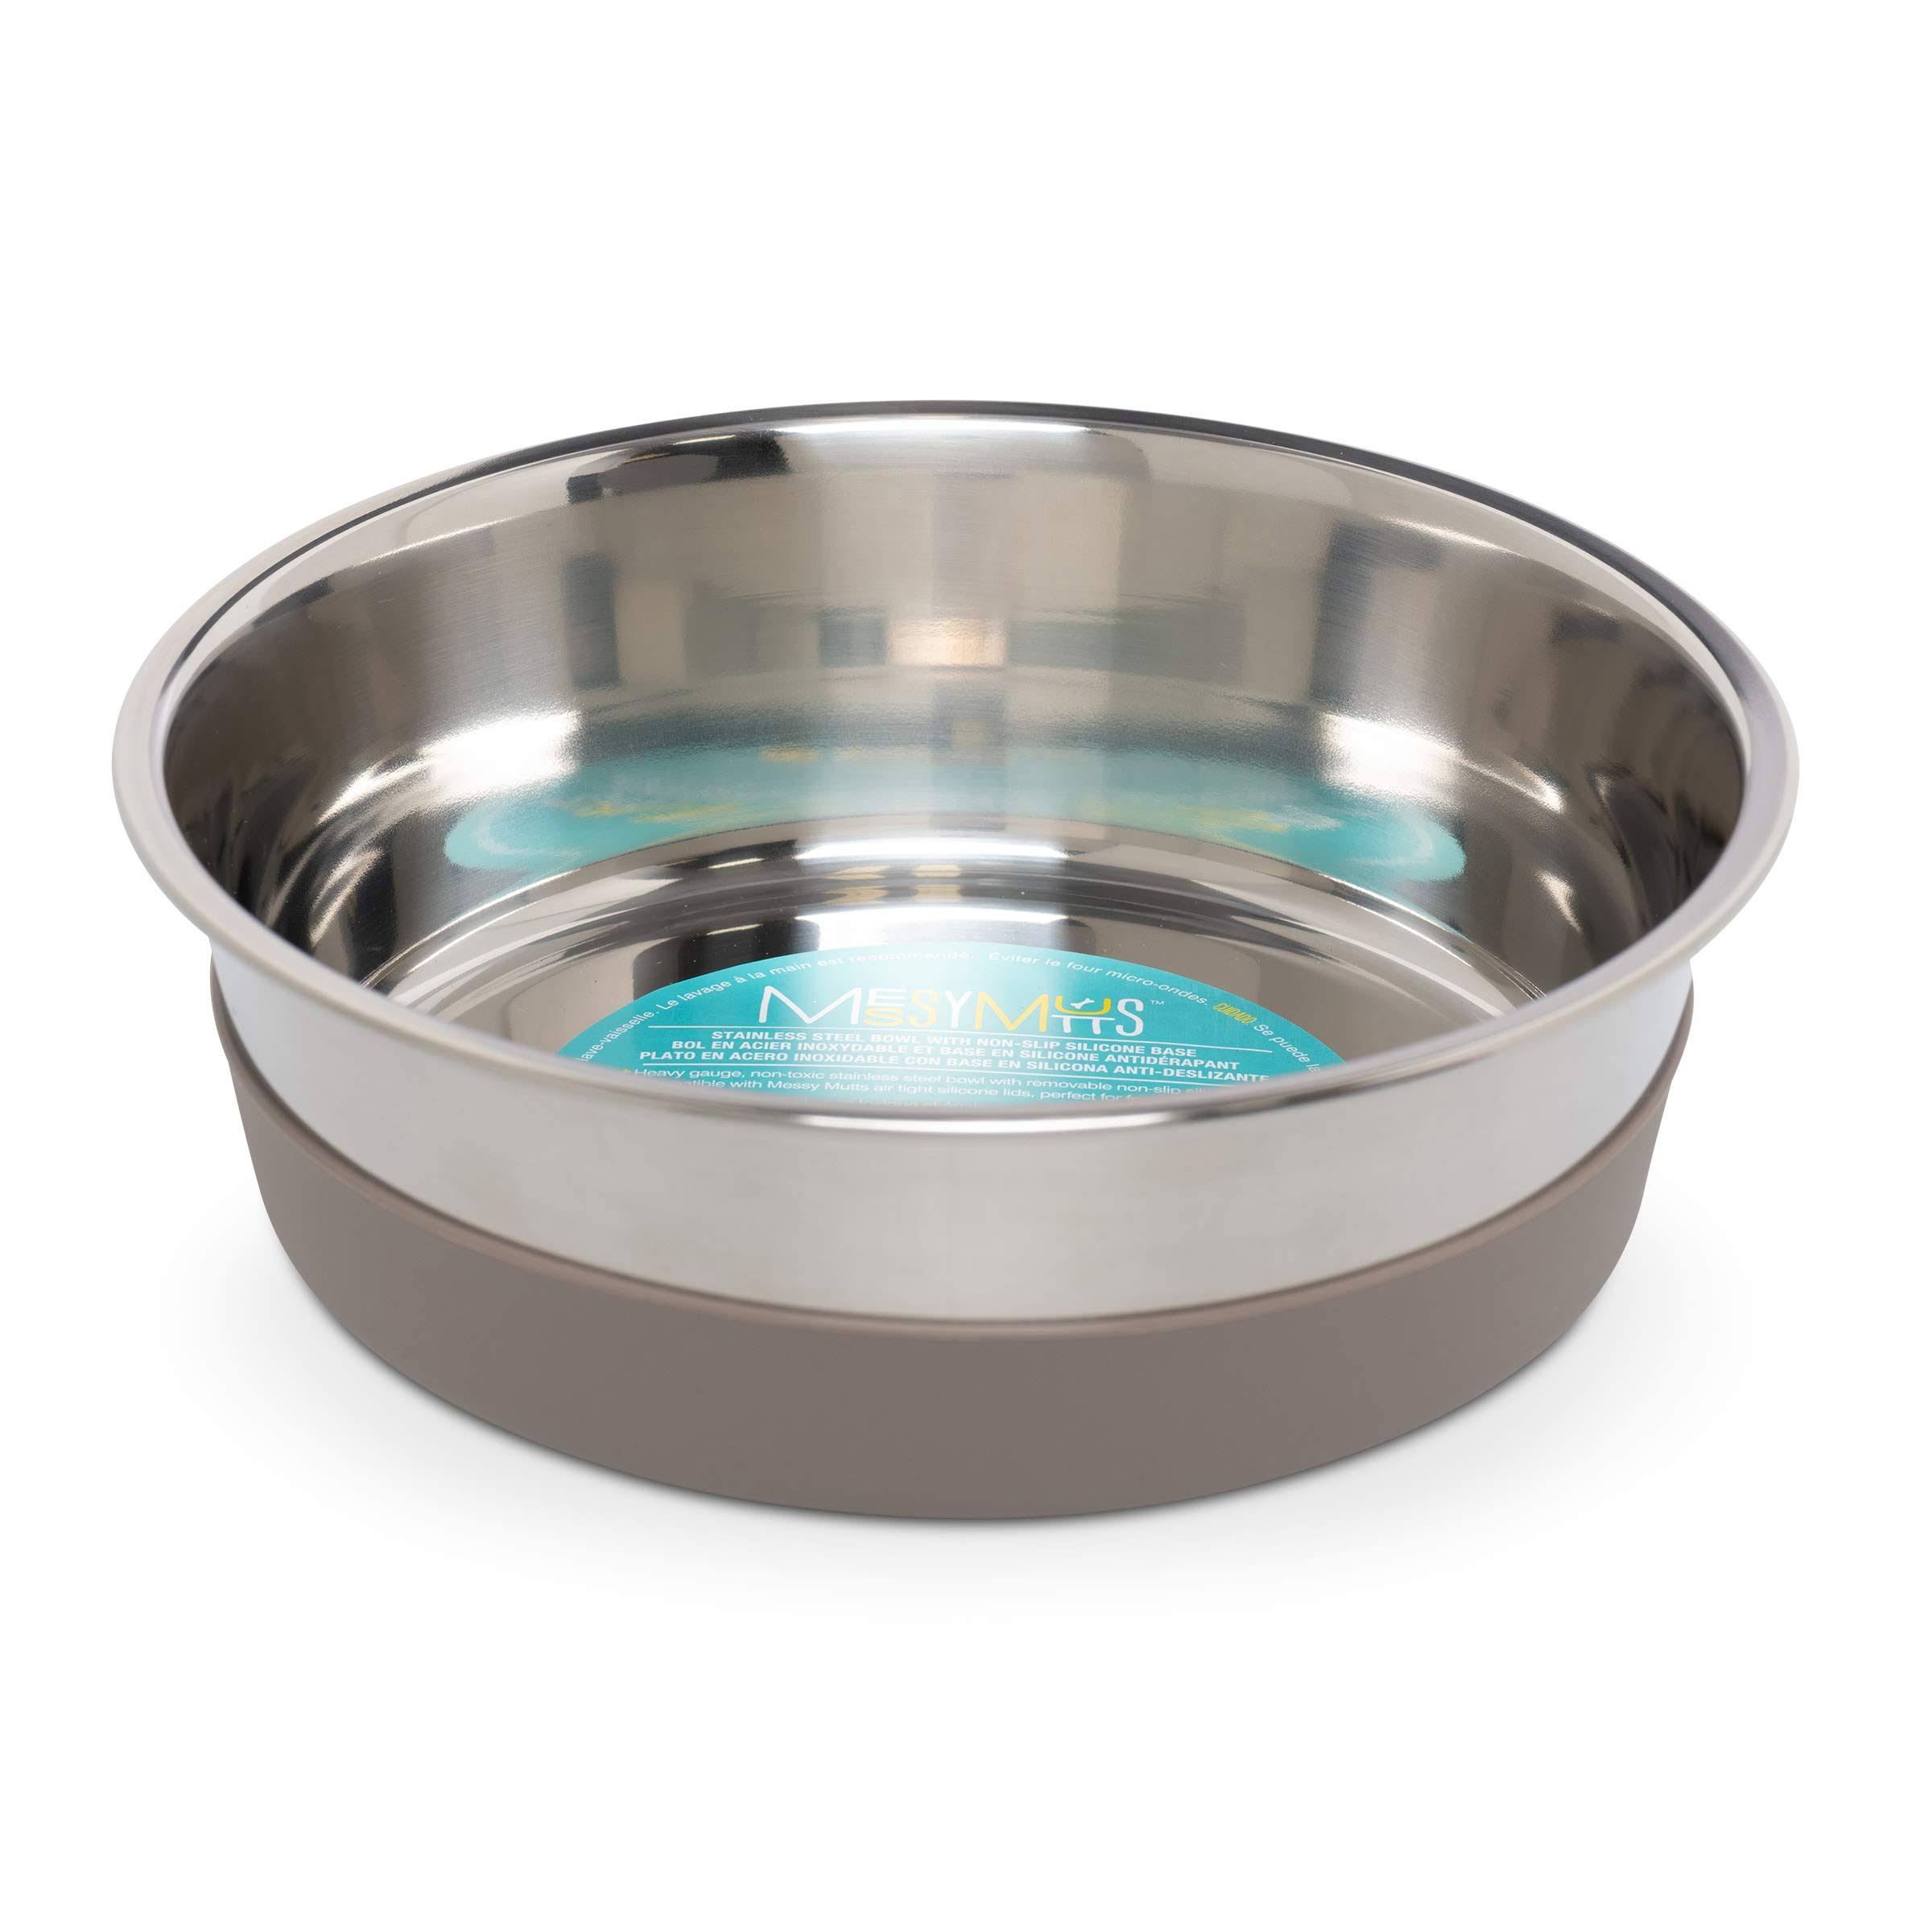 Messy Mutts Stainless Steel Non Slip Large Bowl